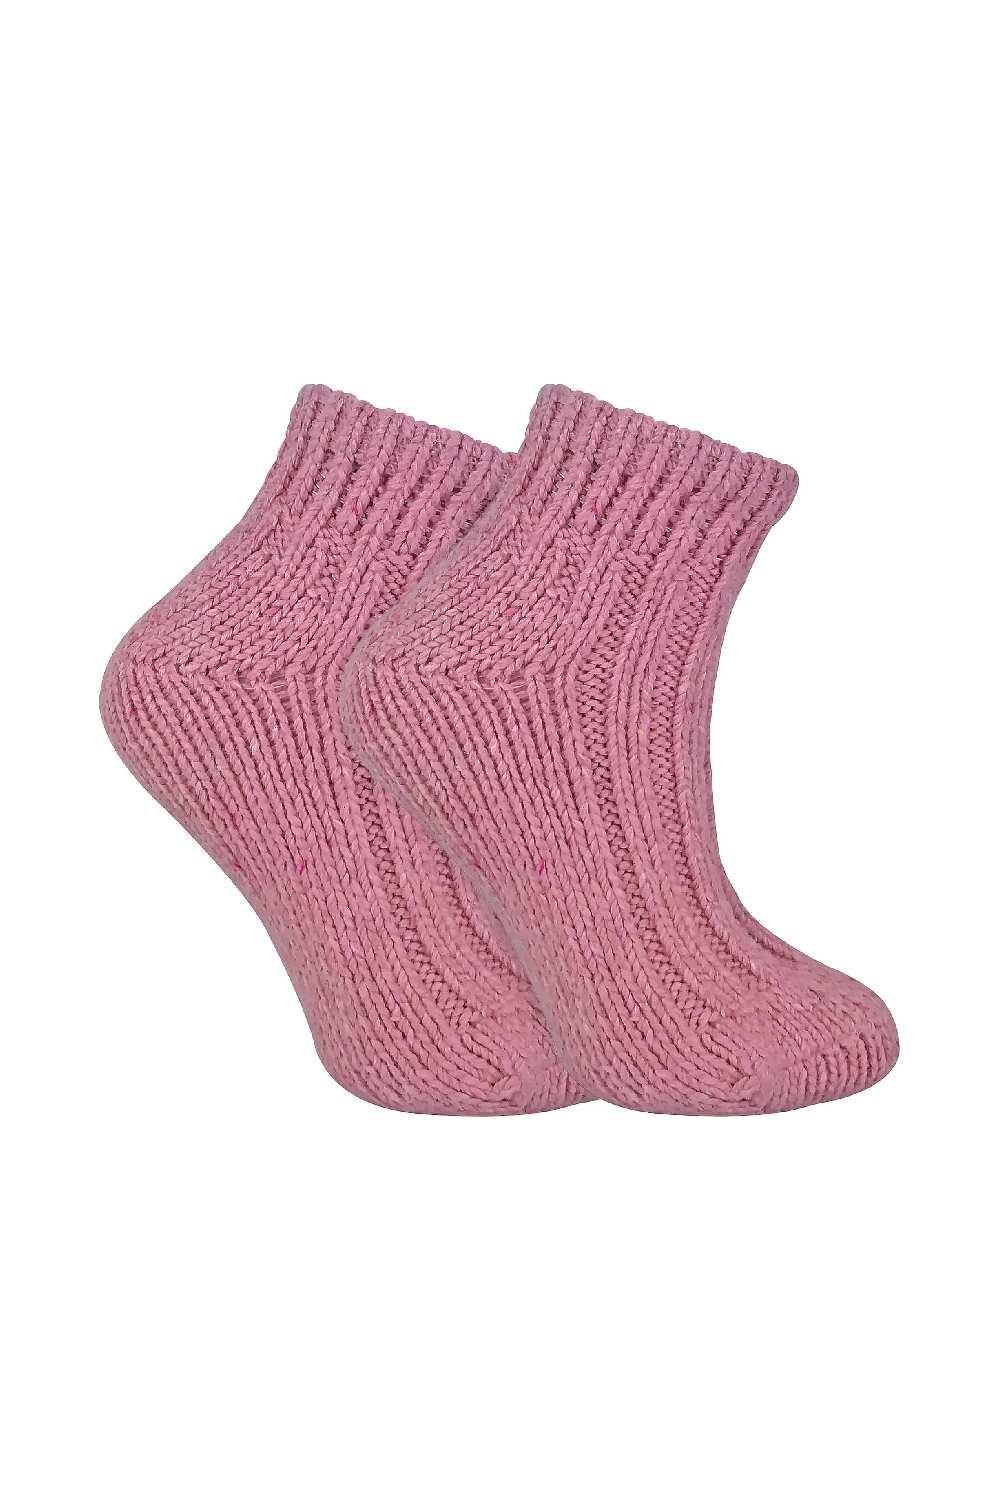 Chunky Ribbed Low Cut Wool Blend Ankle Boot Socks